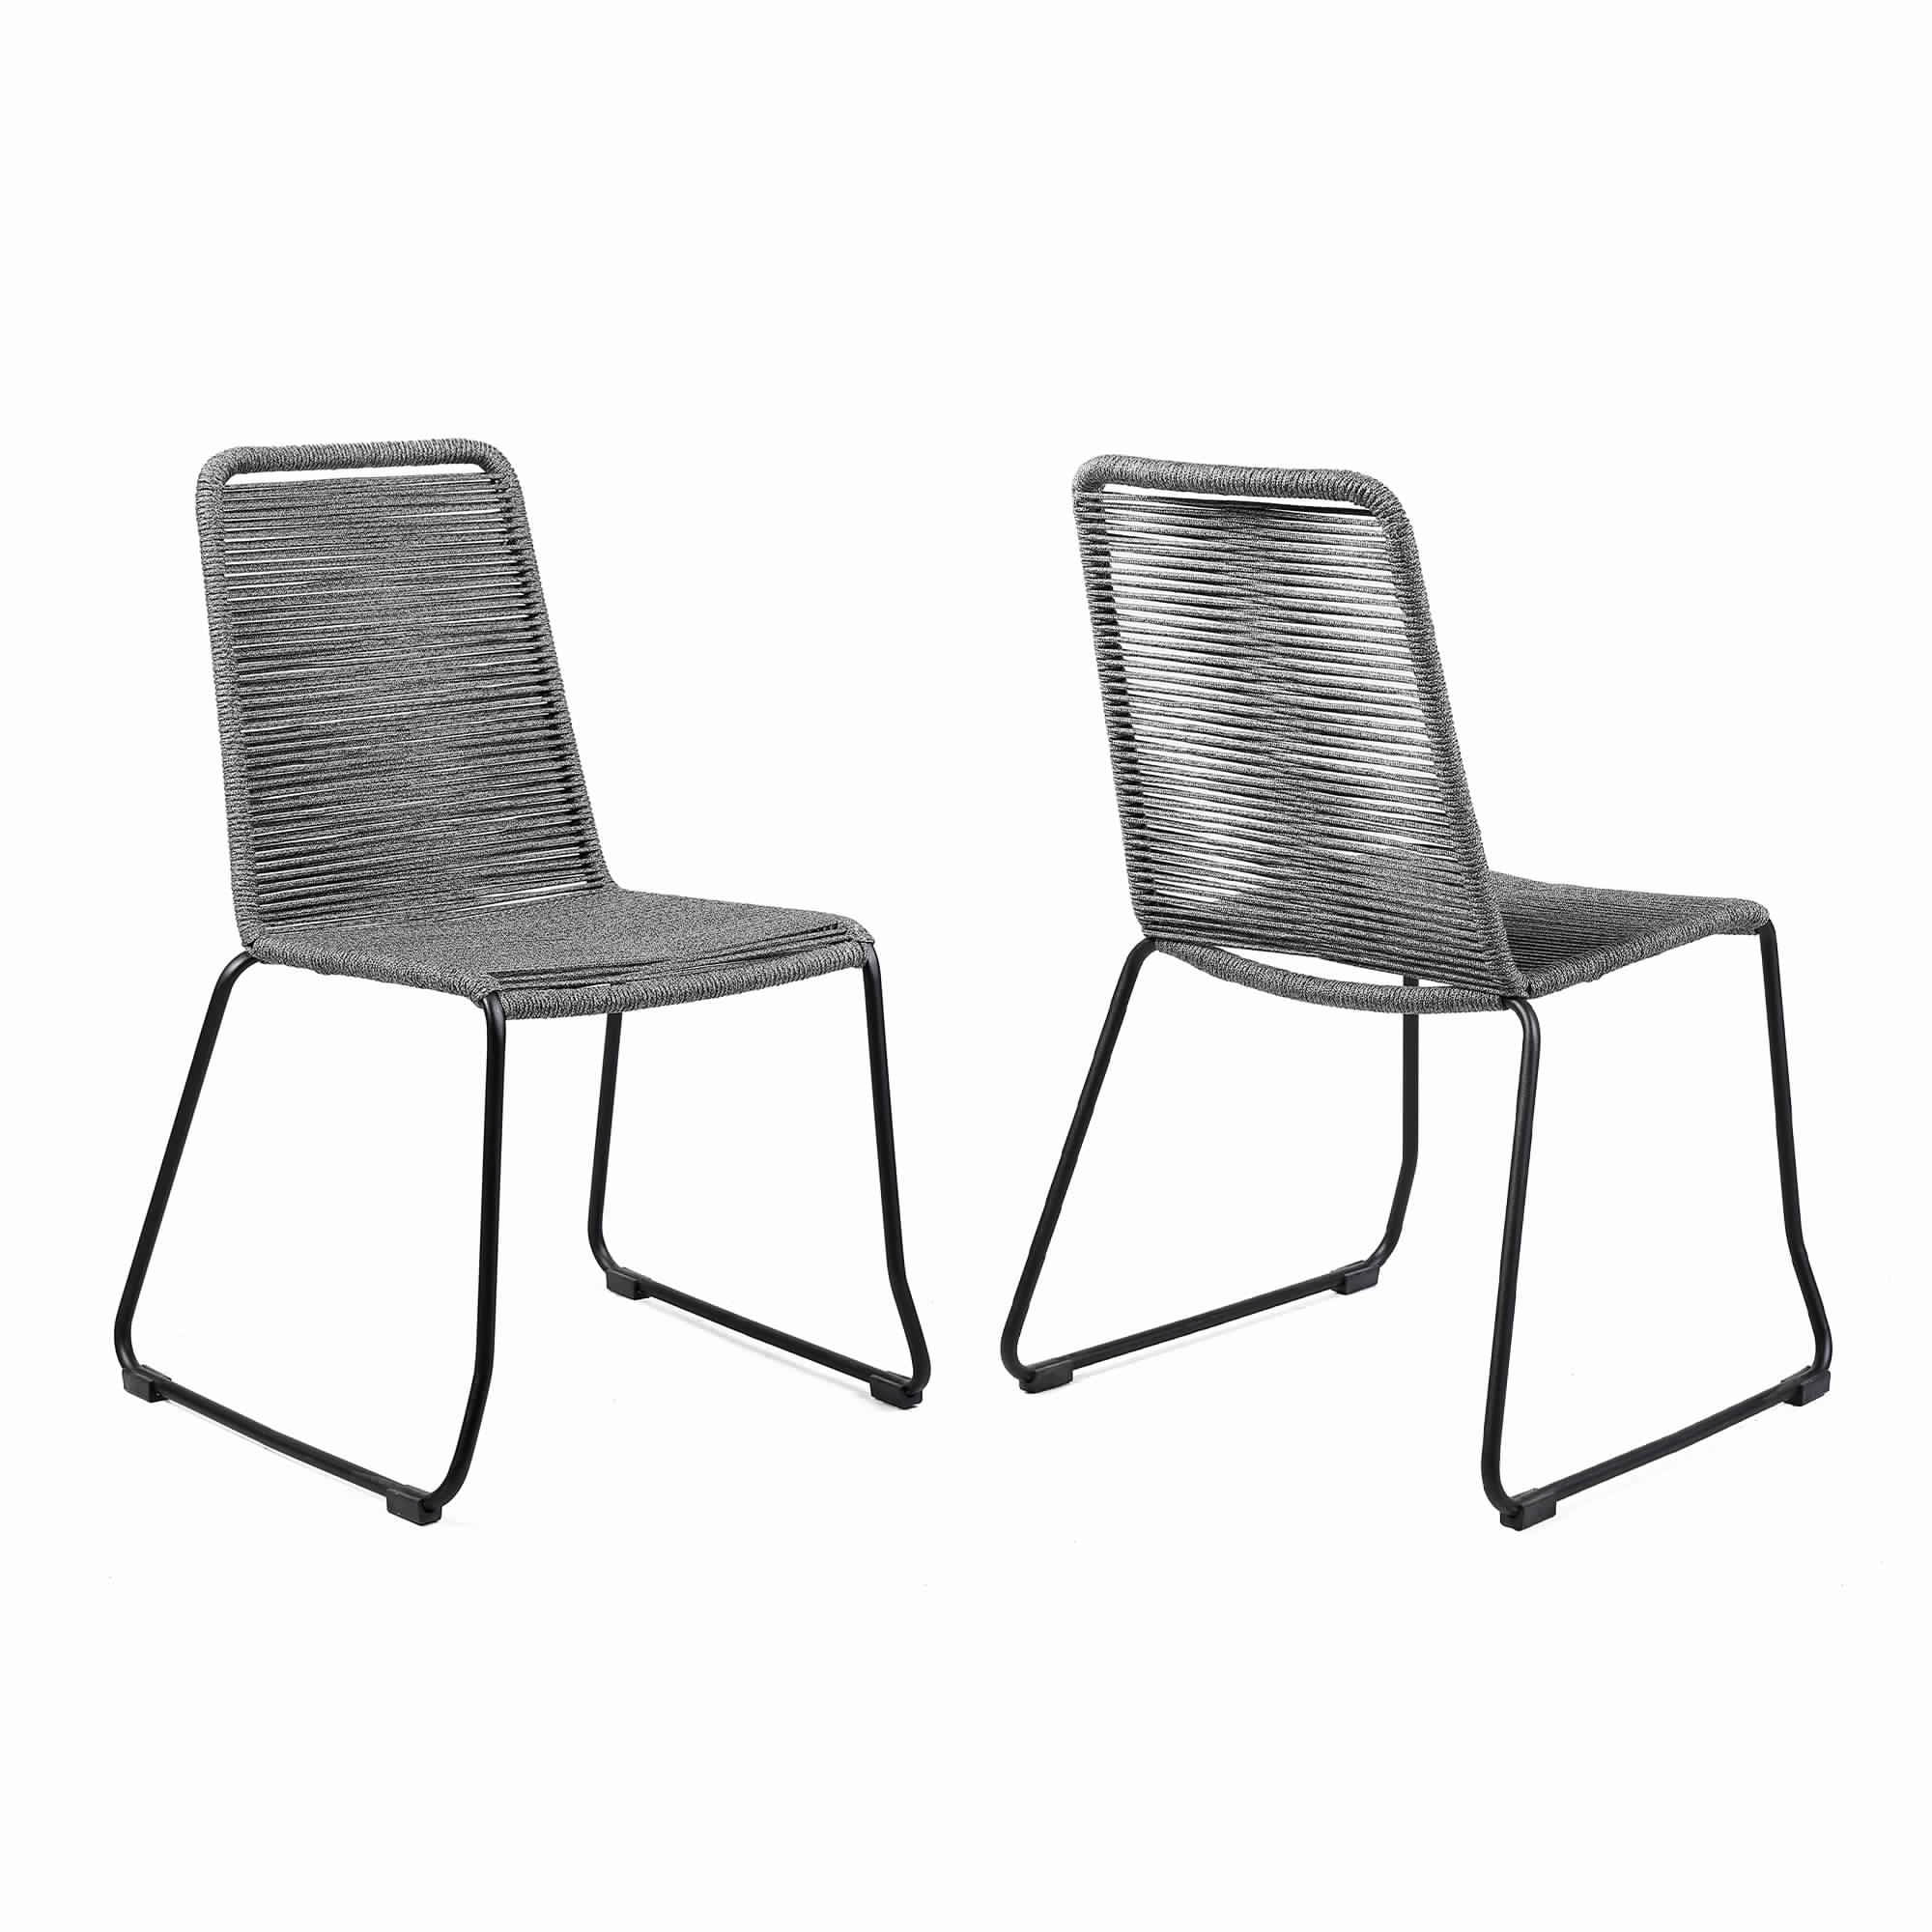 Bm214504 Metal Outdoor Dining Chair With Fishbone Weave, Gray & Black - Set Of 2